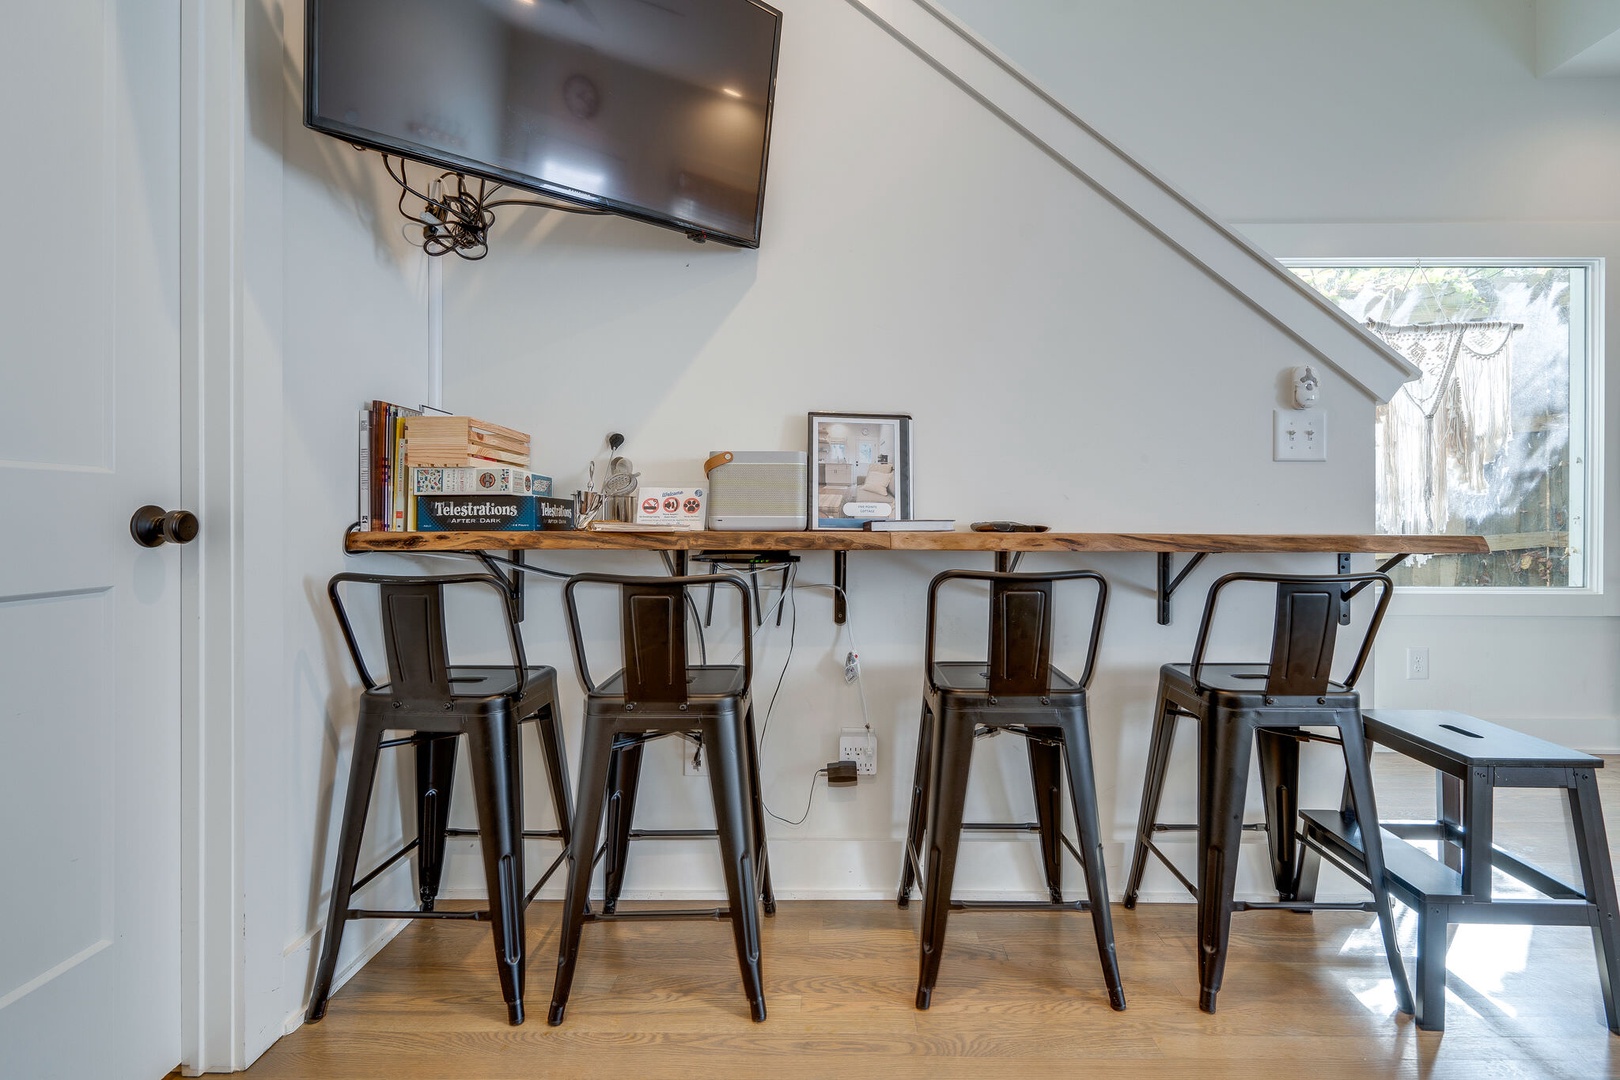 Bar stool seating for 4